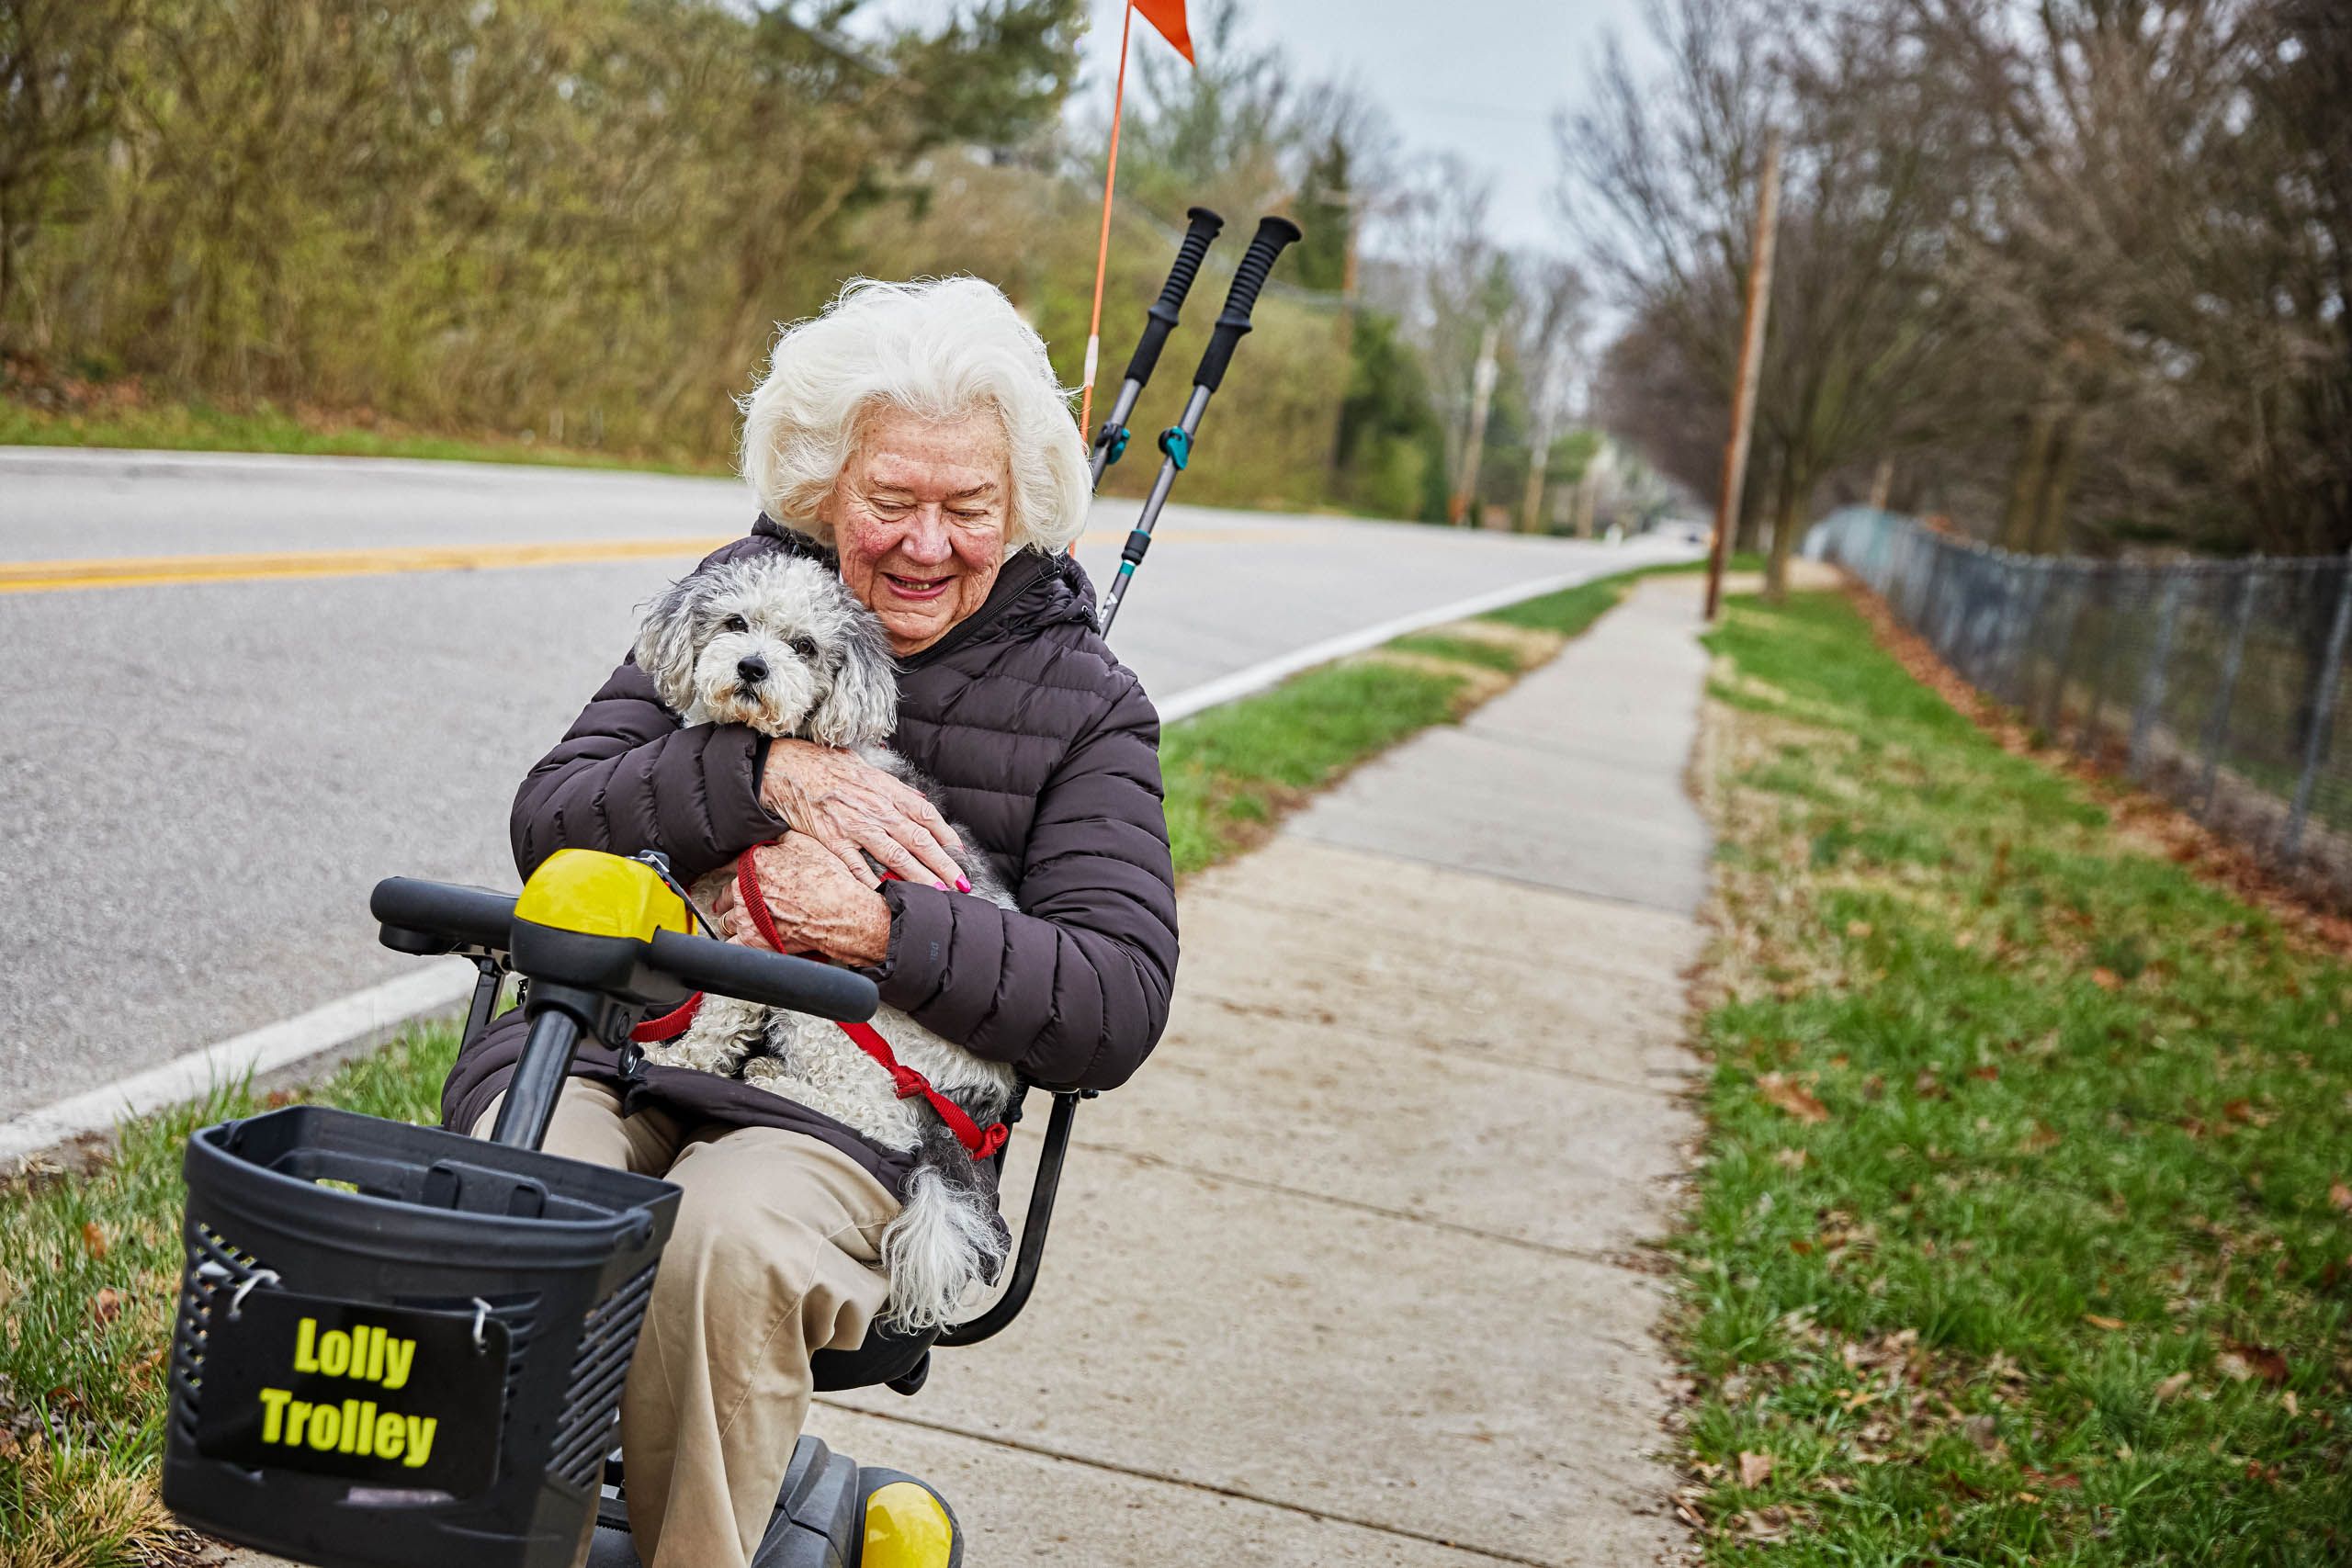 Old Woman Riding Scooter with Dog